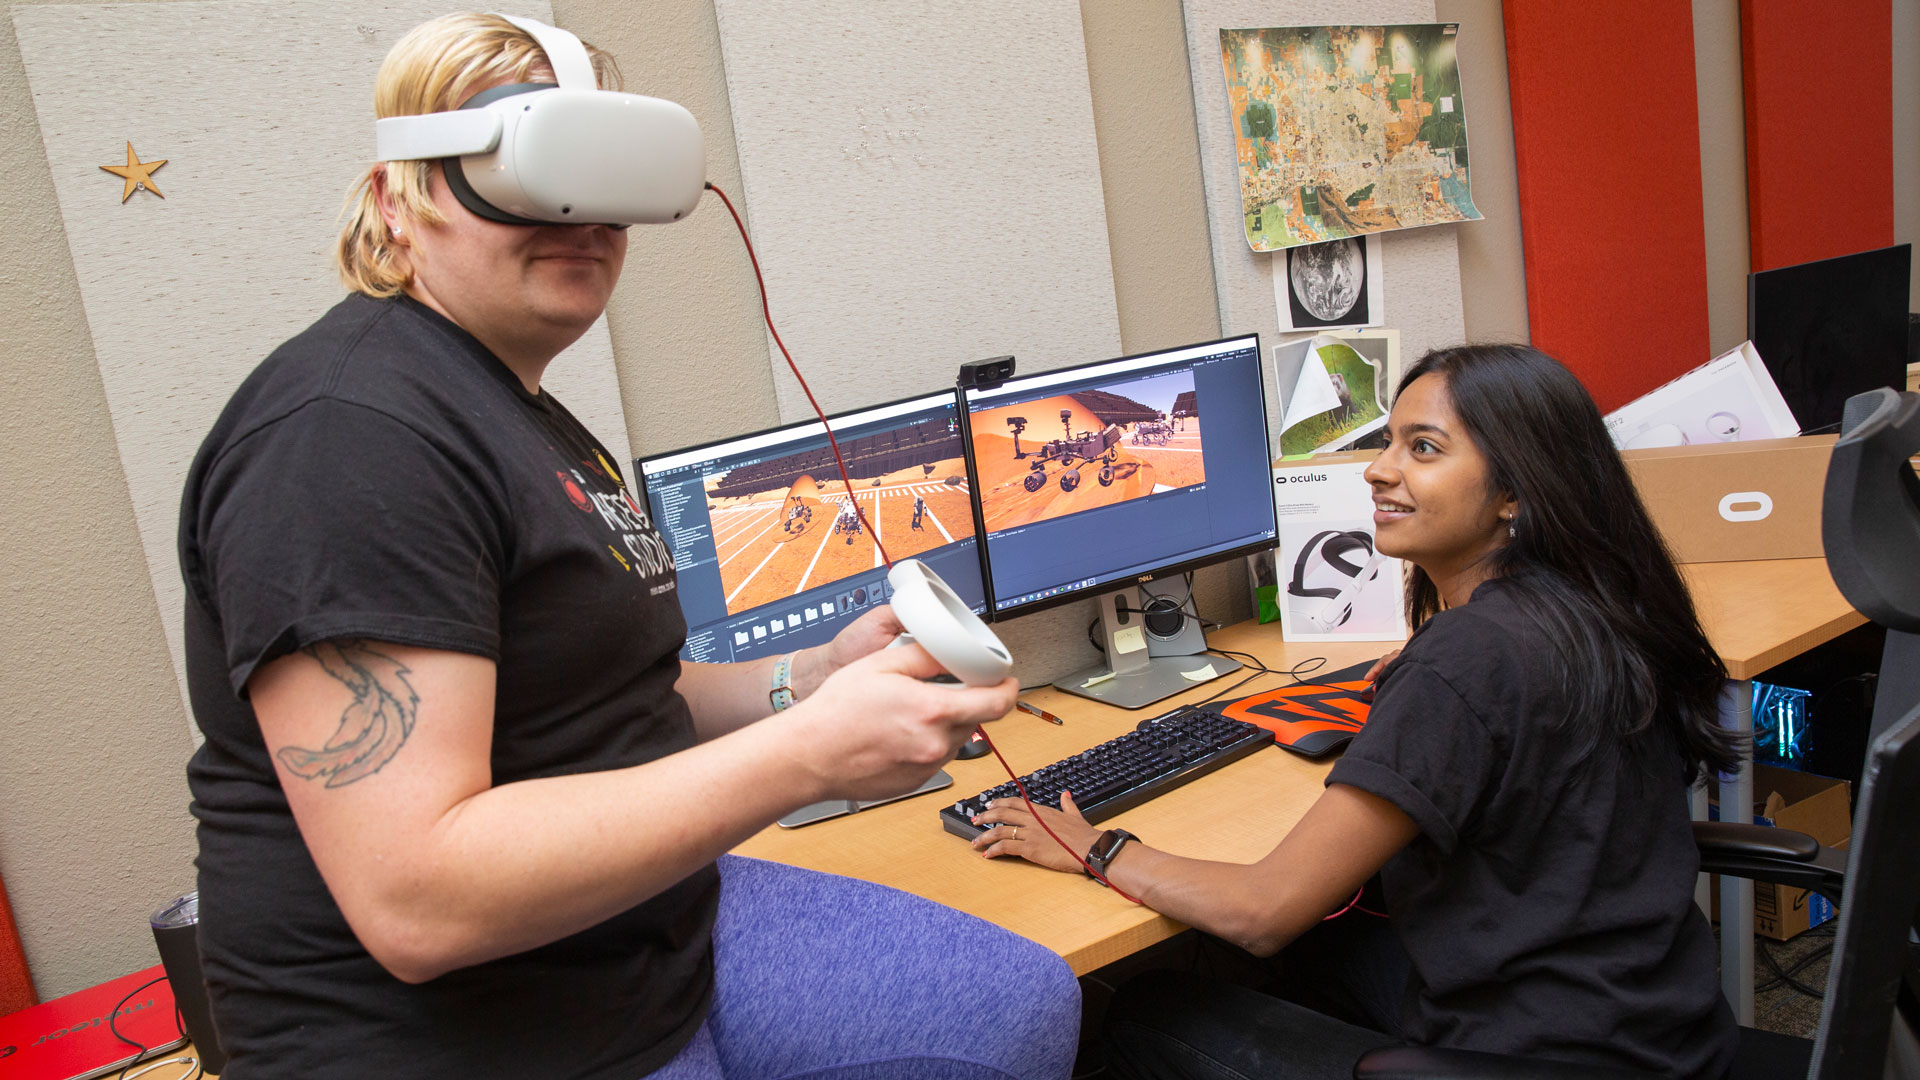 Computer science graduate student Radhika Ganapathy demonstrates the use of virtual reality to visualize data in the ASU Meteor Studio as part of her MORE research project in the Ira A. Fulton Schools of Engineering.